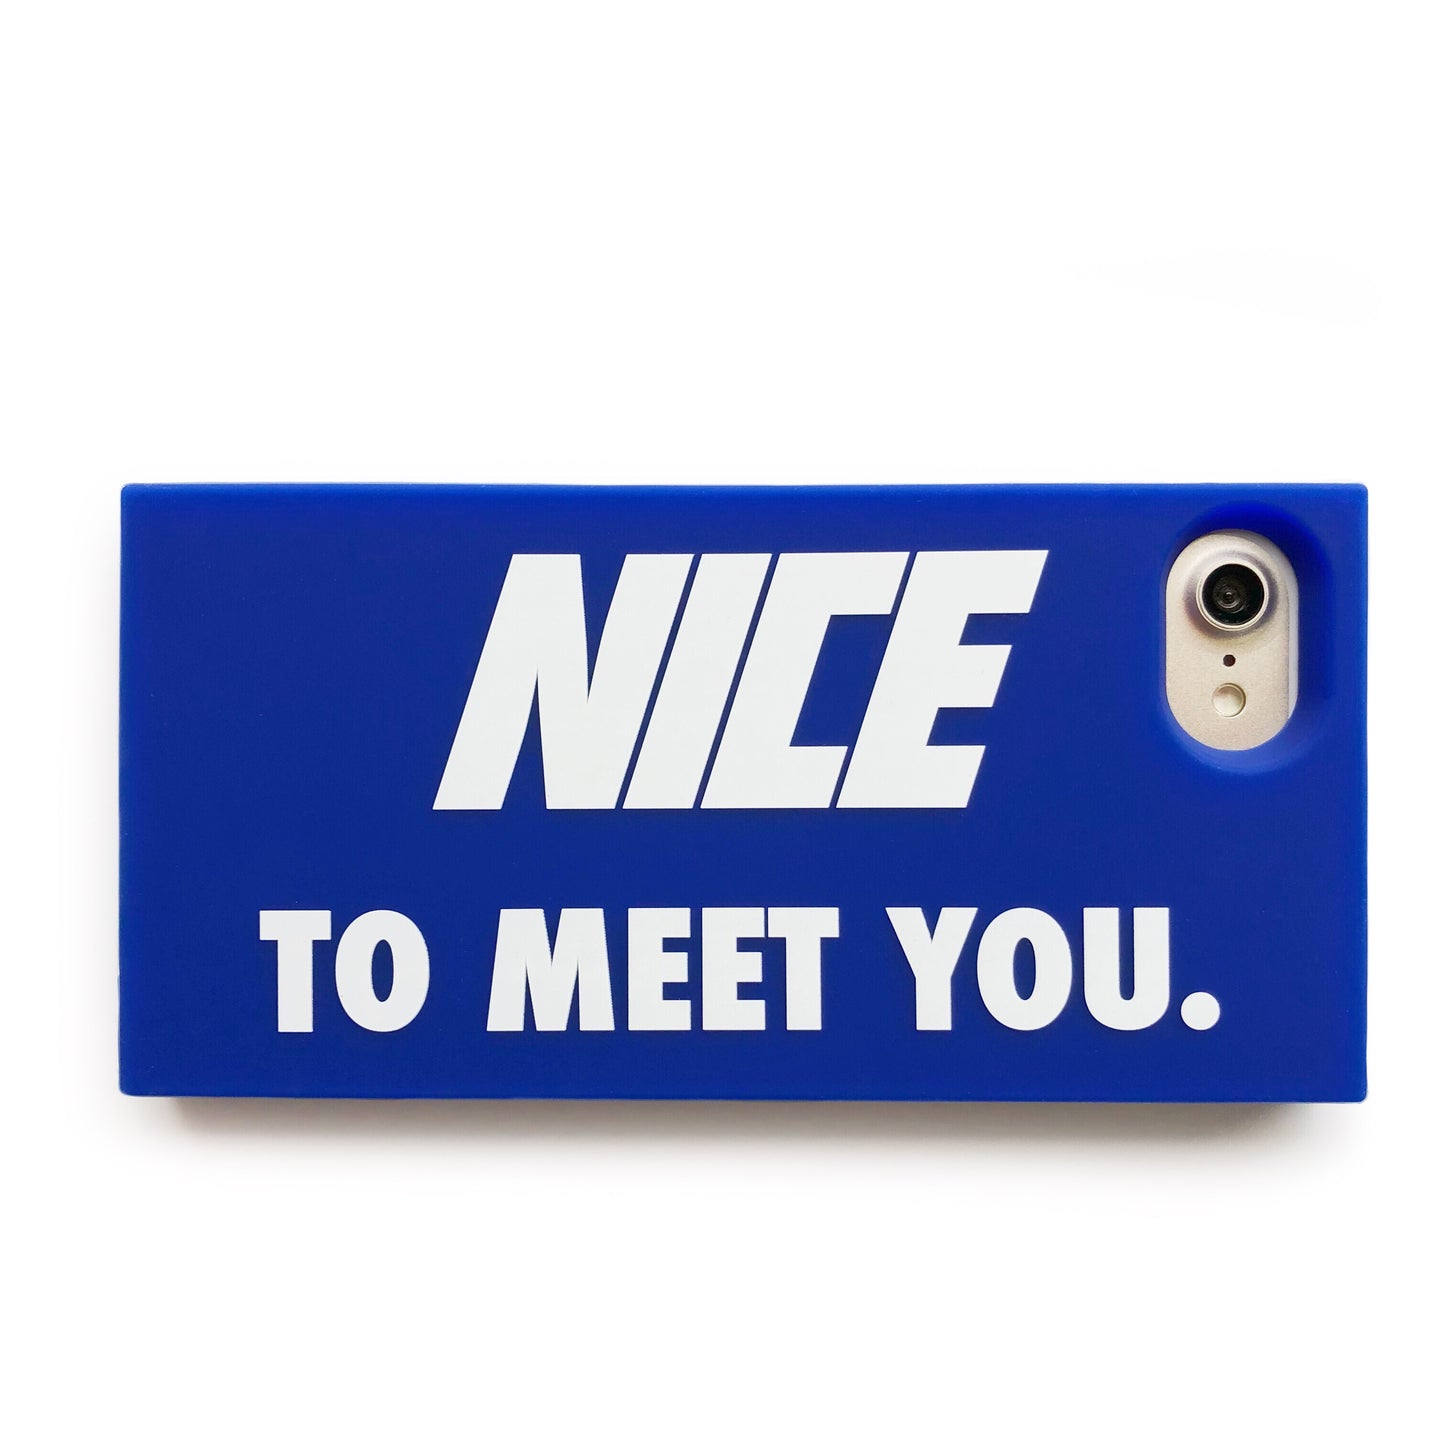 iPhone SE/7/8 Simple Case - Nice to Meet You (Blue)